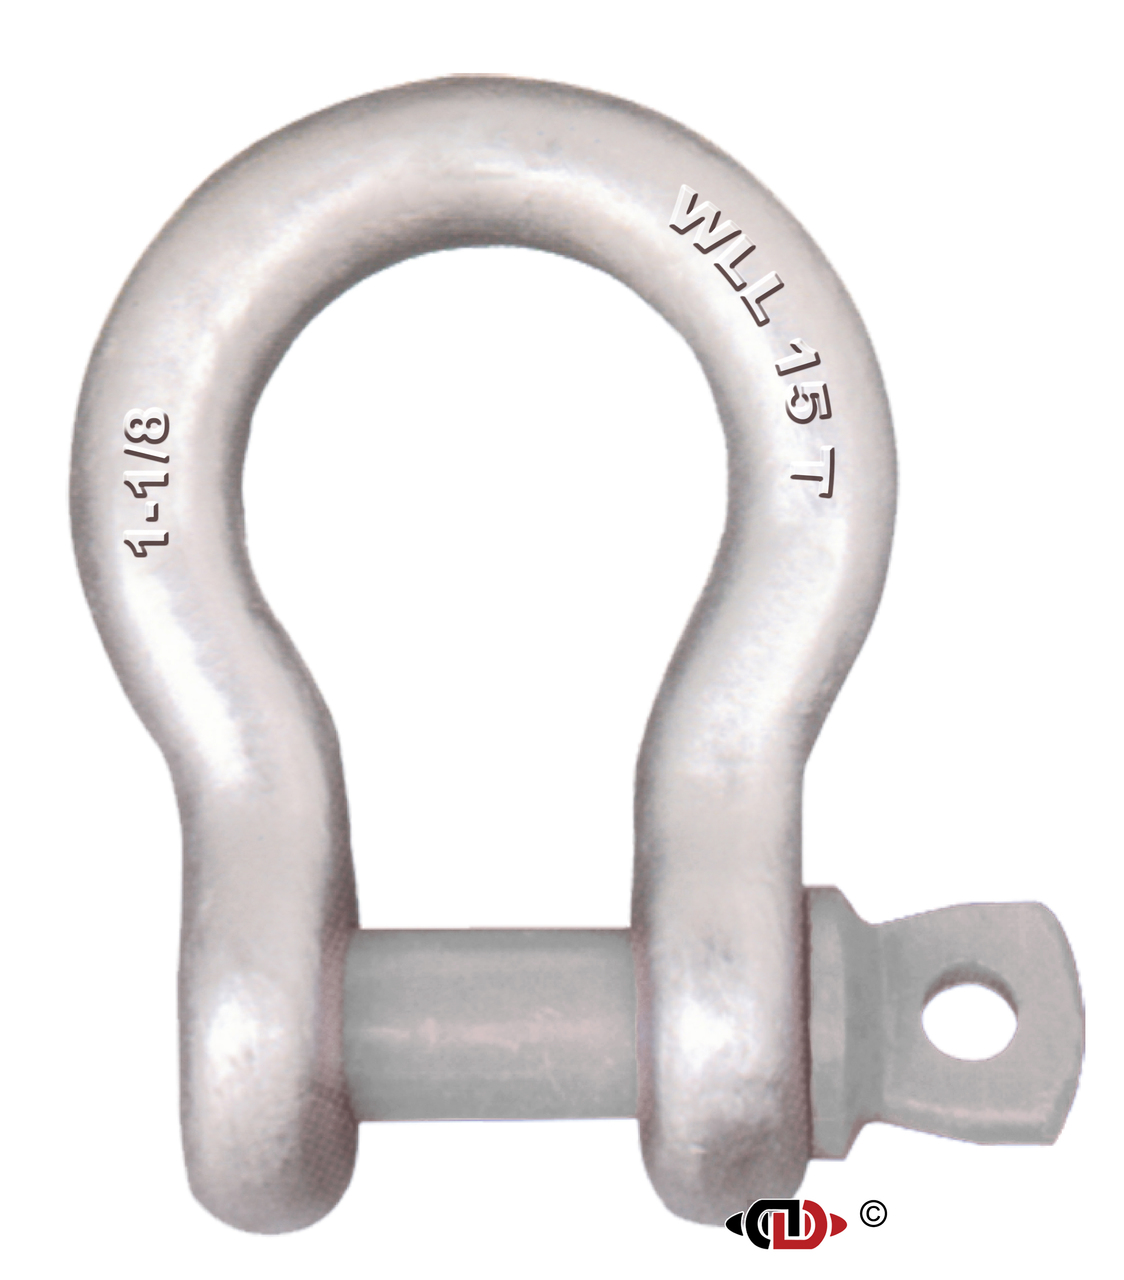 D3 15 Ton Alloy Screw Pin Anchor Shackle 1-1/8" Crosby G209A MILITARY 1017604 